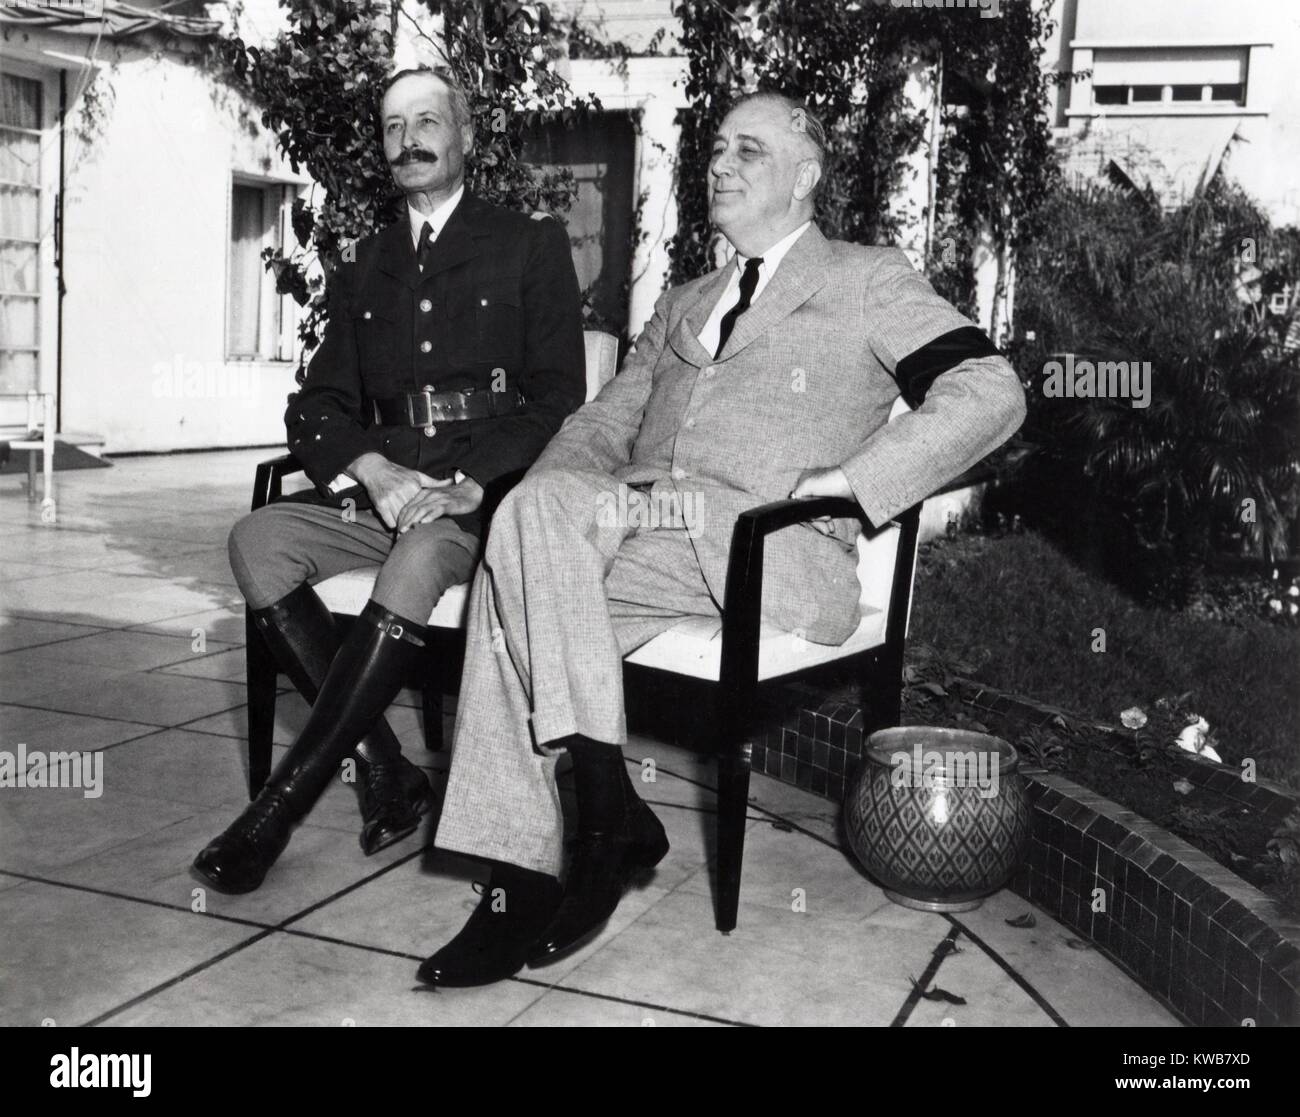 President Franklin Roosevelt photographed with French General Henri Honore Giraud, Jan. 1943. Giraud was negotiating with the North African Vichy Regimes, attempting to bring them into the British-American alliance against Germany. World War 2. (BSLOC 2014 8 189) Stock Photo